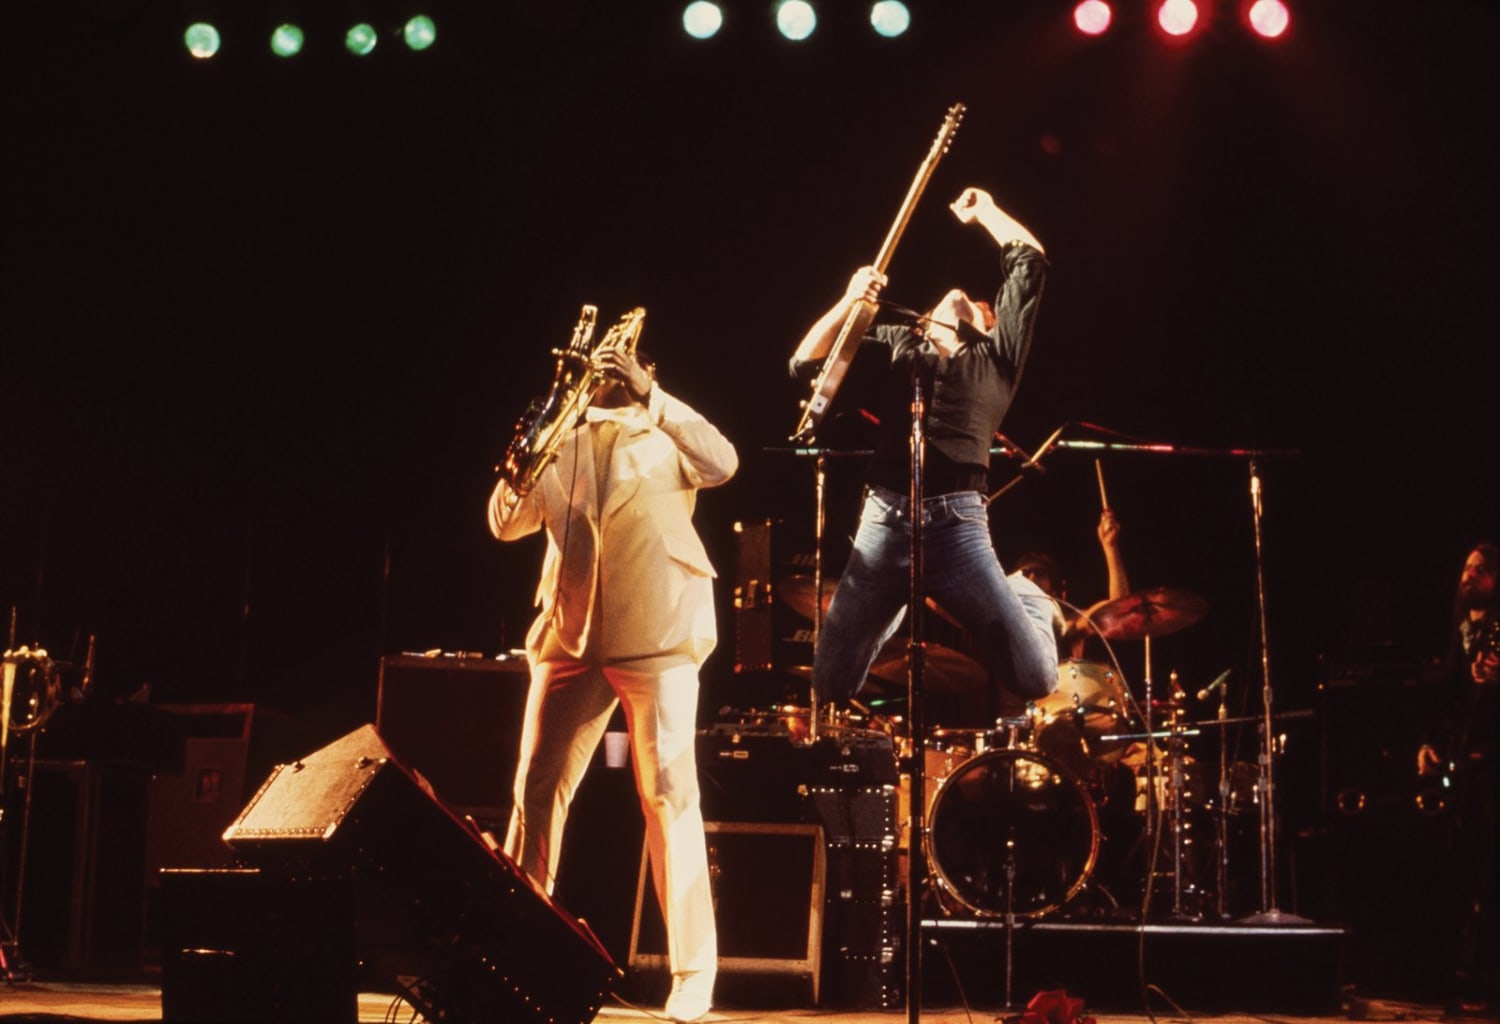 Ten Rarely Seen Springsteen Photographs That Capture the Exhilarating Power of The Boss